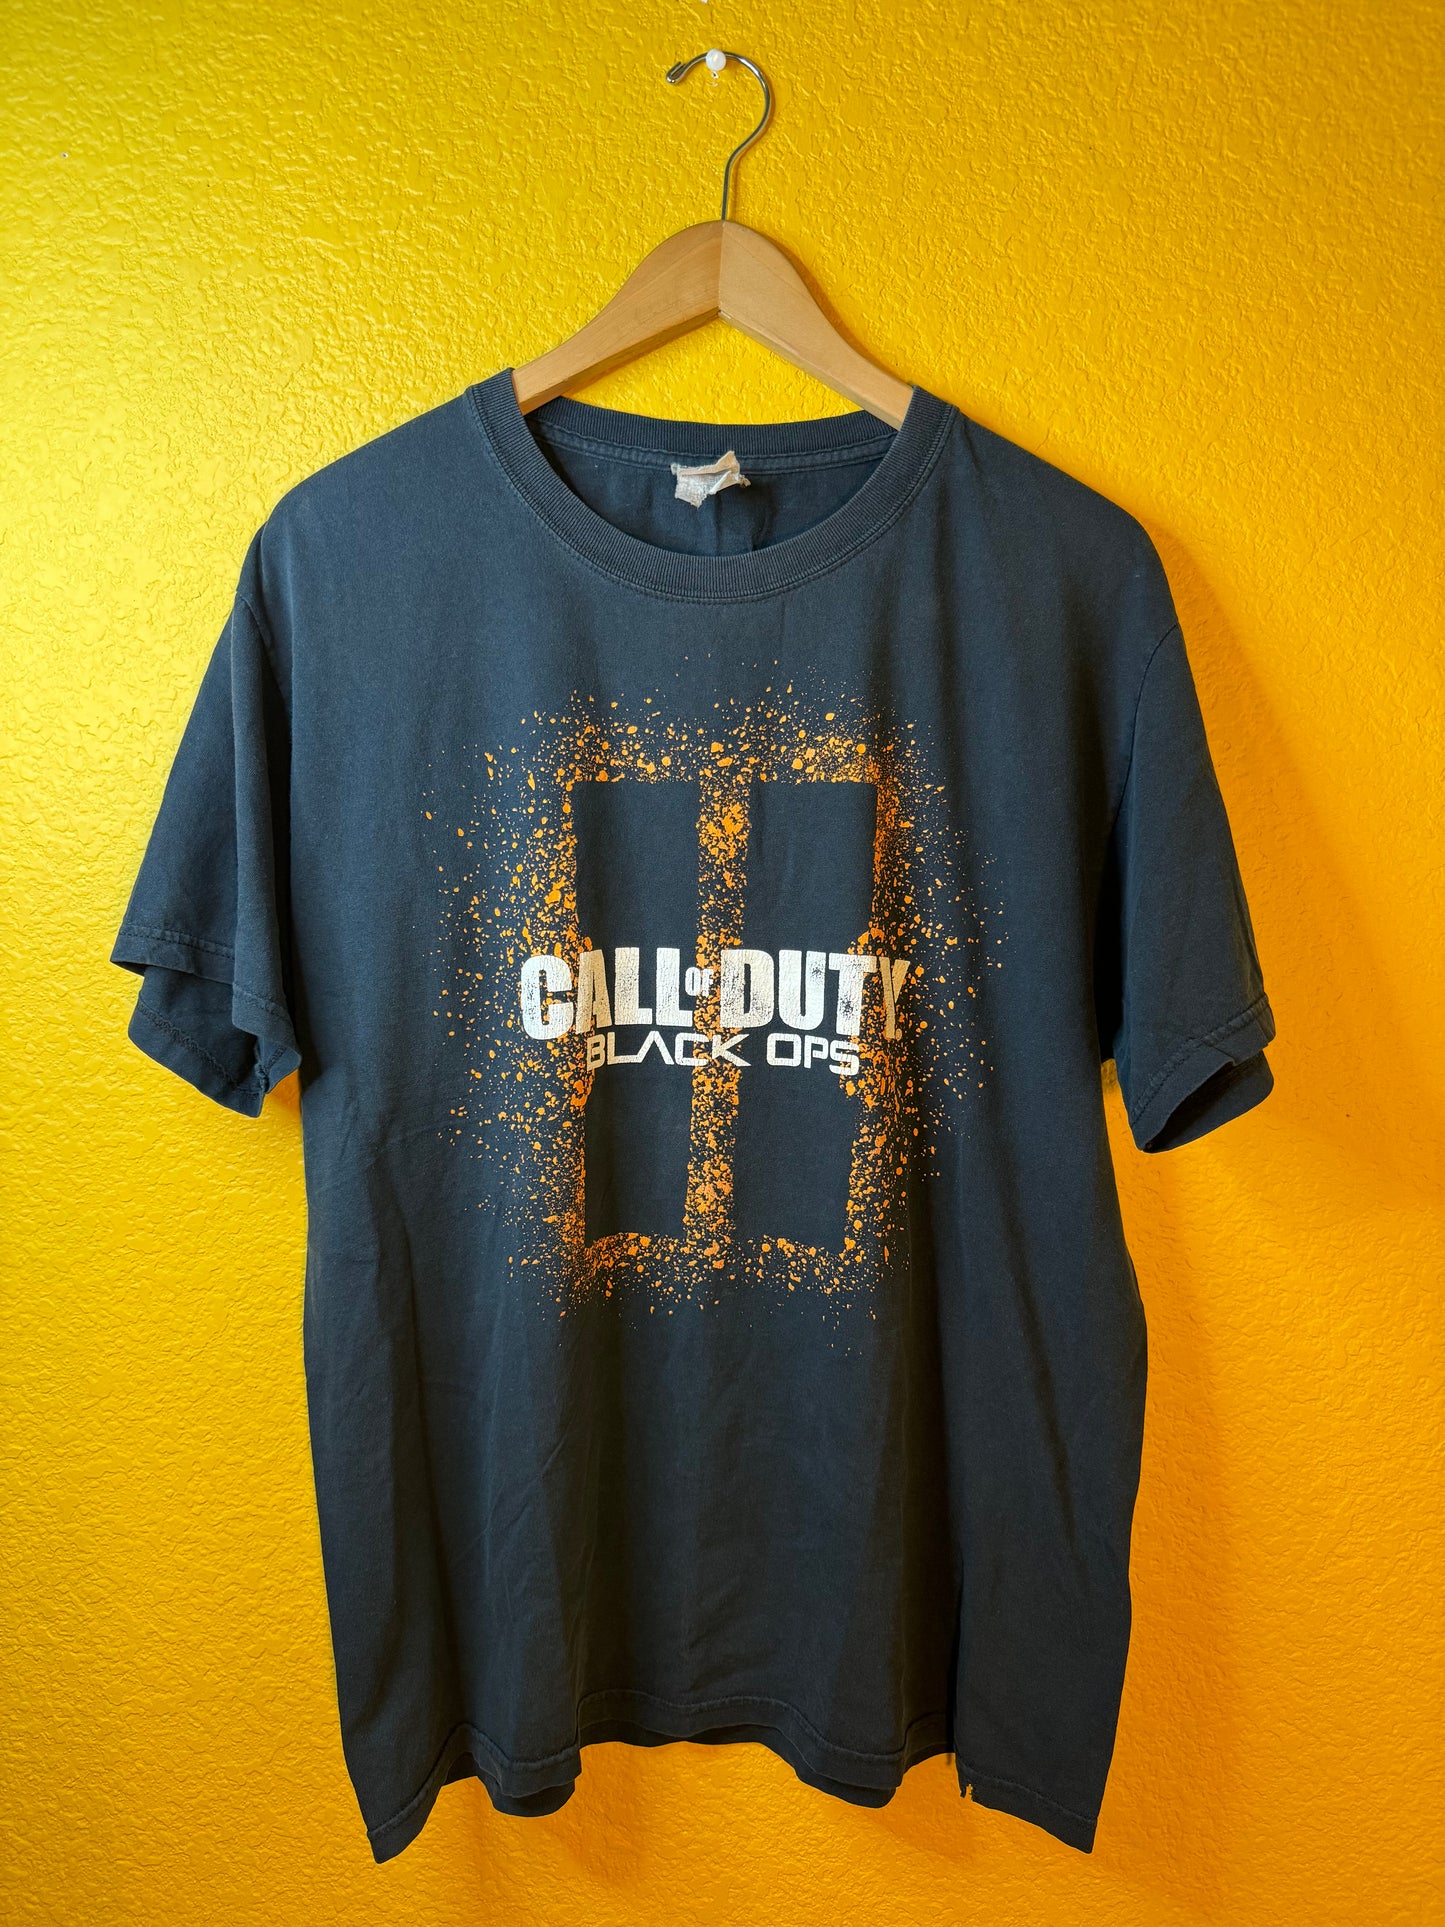 Call Of Duty Black Ops 2 Tee - Large